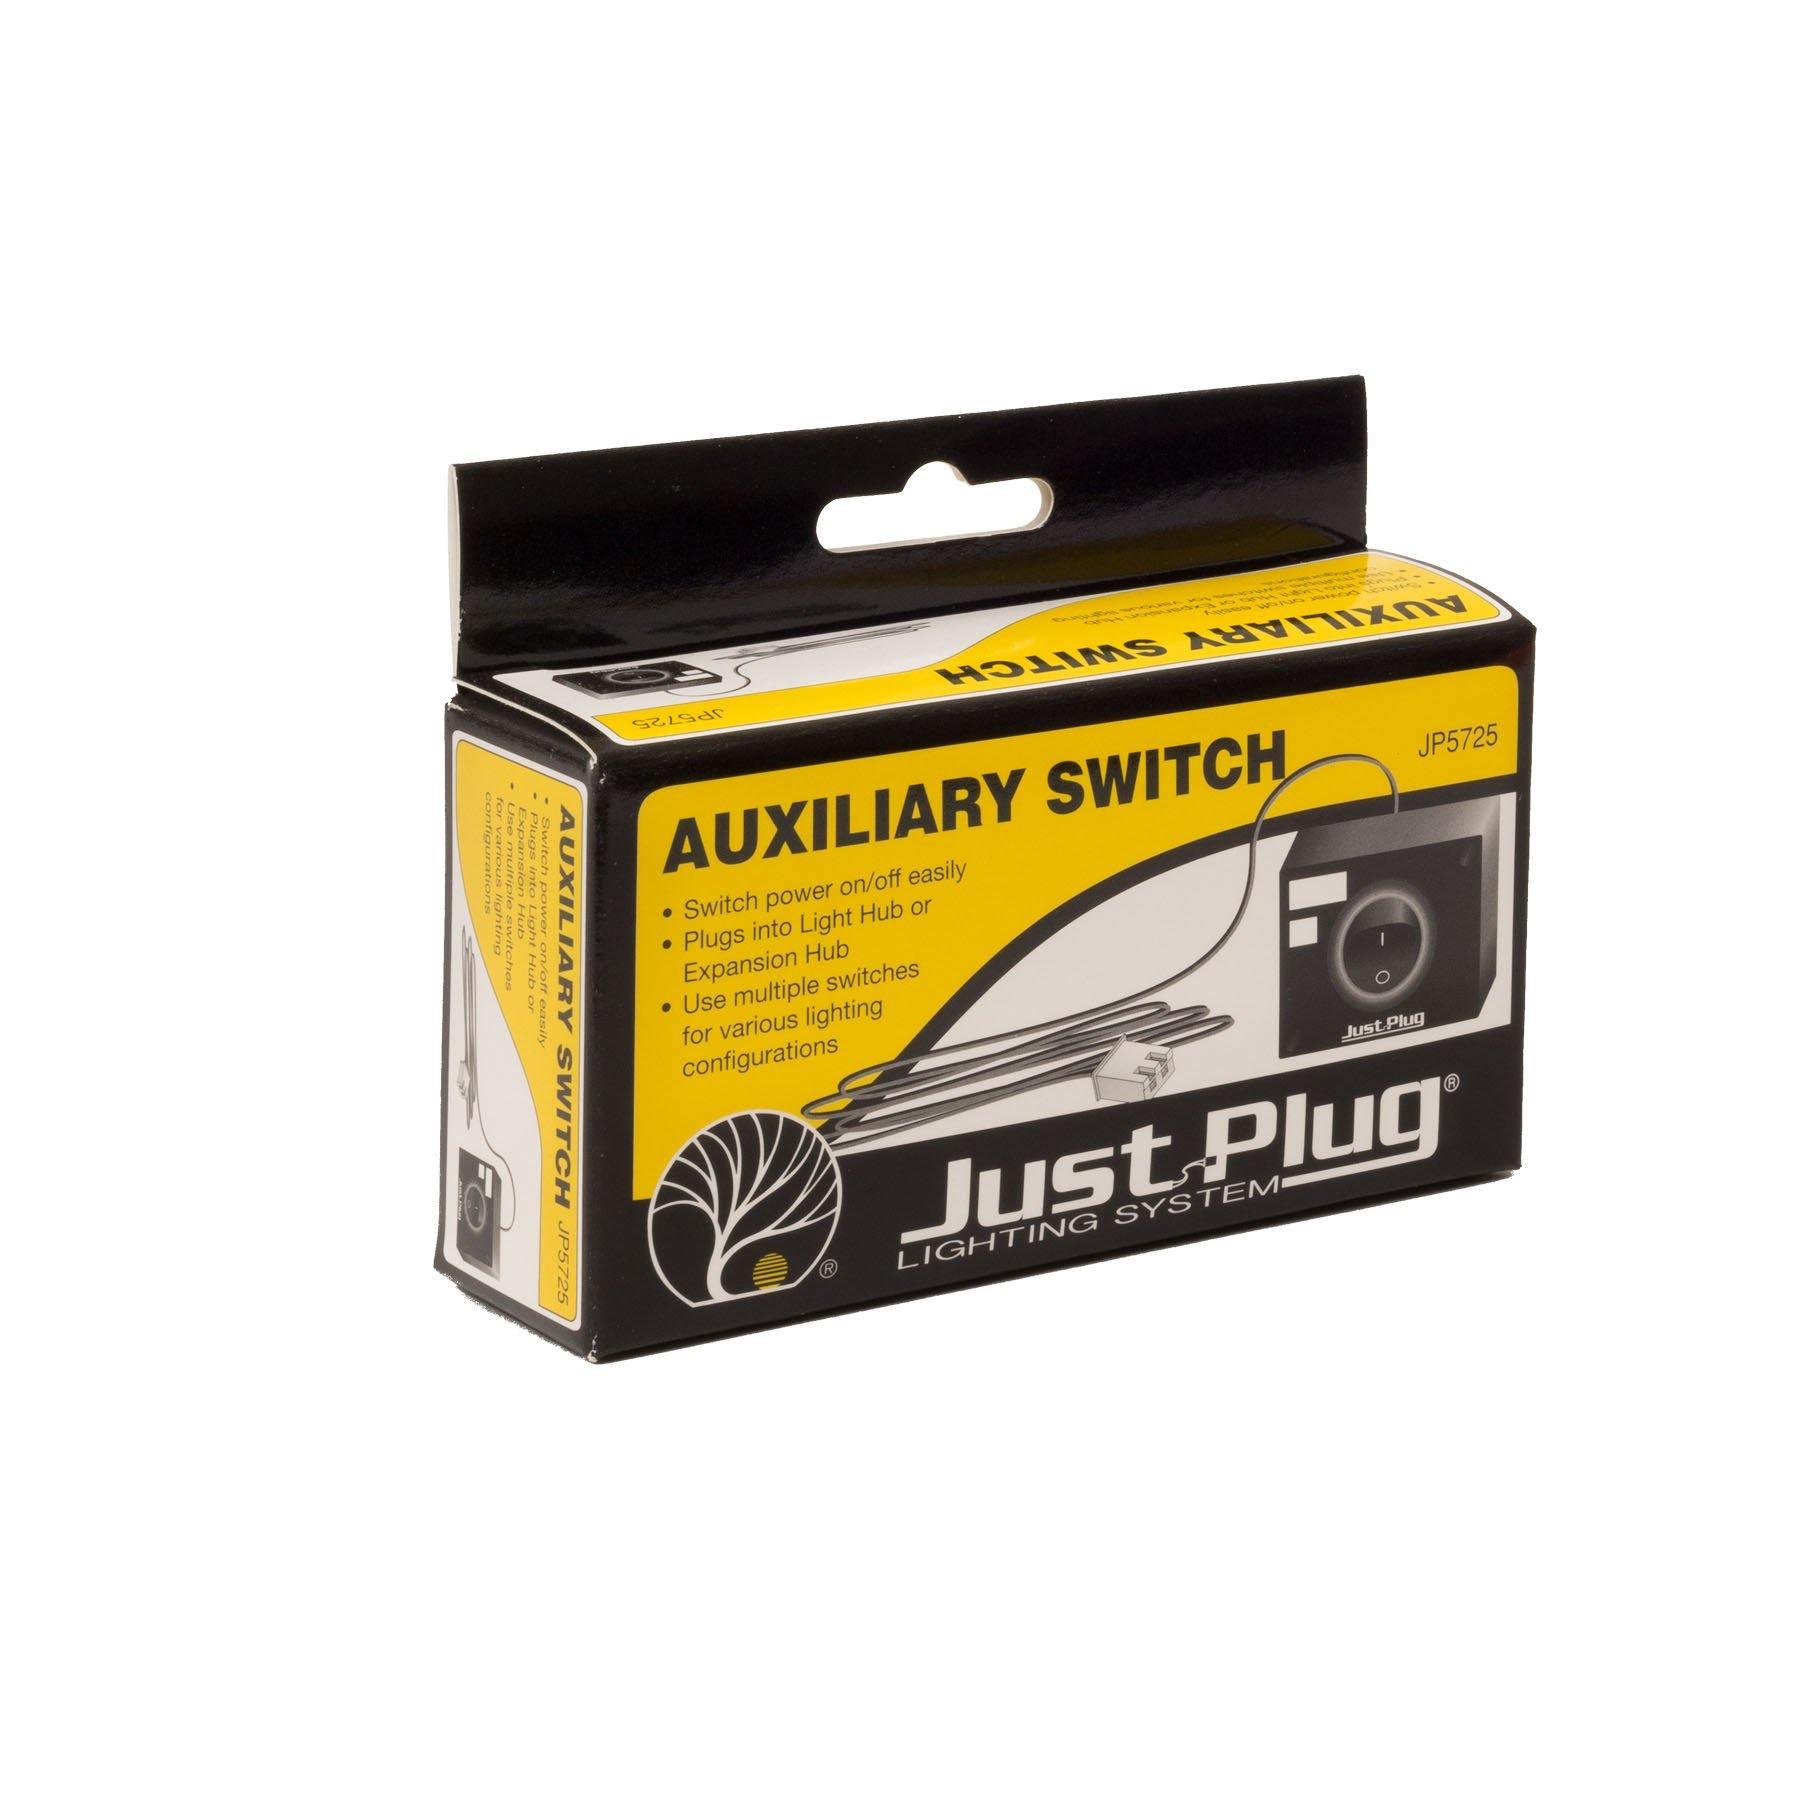 Woodland Scenics 5725 | Just Plug Lighting System - Auxiliary Switch | Multi Scale